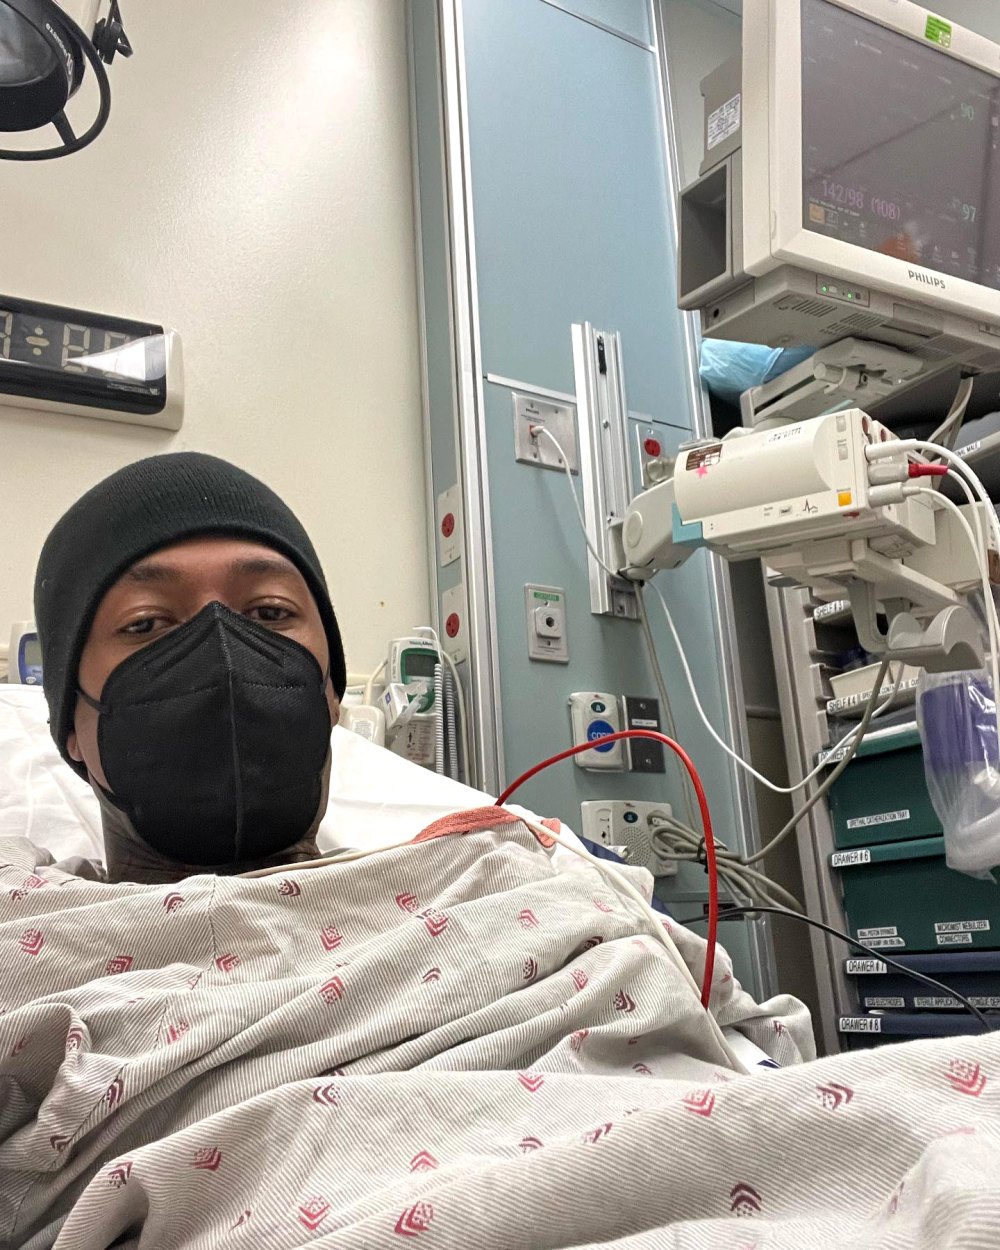 Nick Cannon Hospitalized Amid Pneumonia Battle: It's 'A Great Lesson to Take Care' of Yourself'